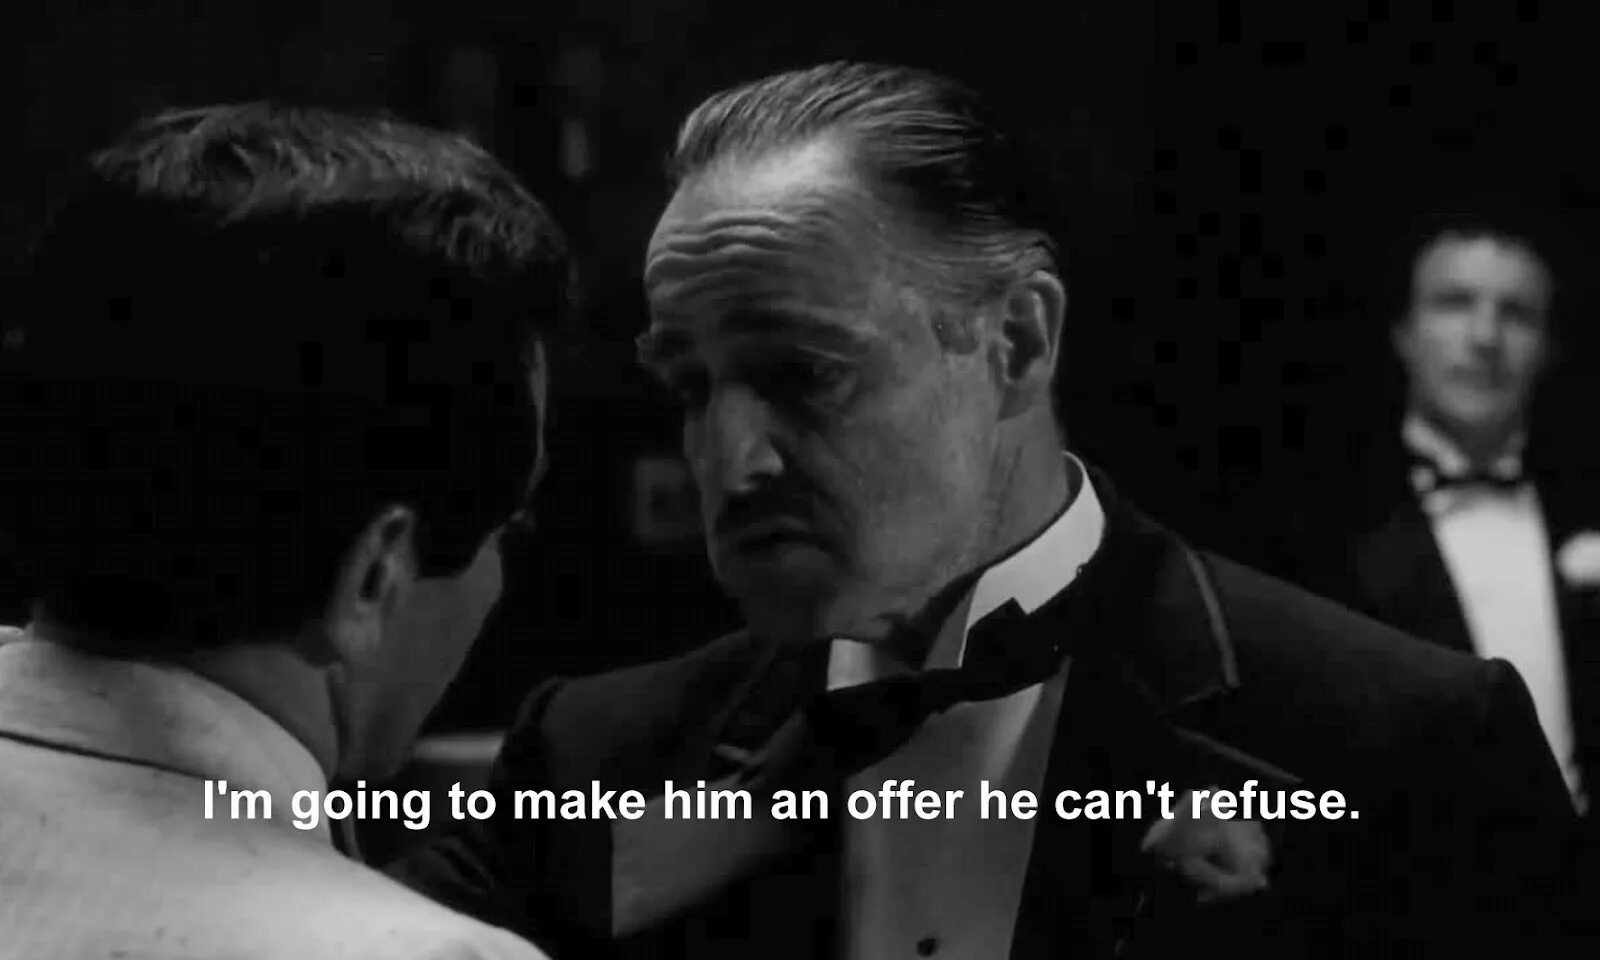 Make him an offer he can't refuse. I'M going to make him an offer he can't refuse. I M gonna make him an offer he can't refuse. Крестный отец i gonna make an offer you cant refuse. Make him away